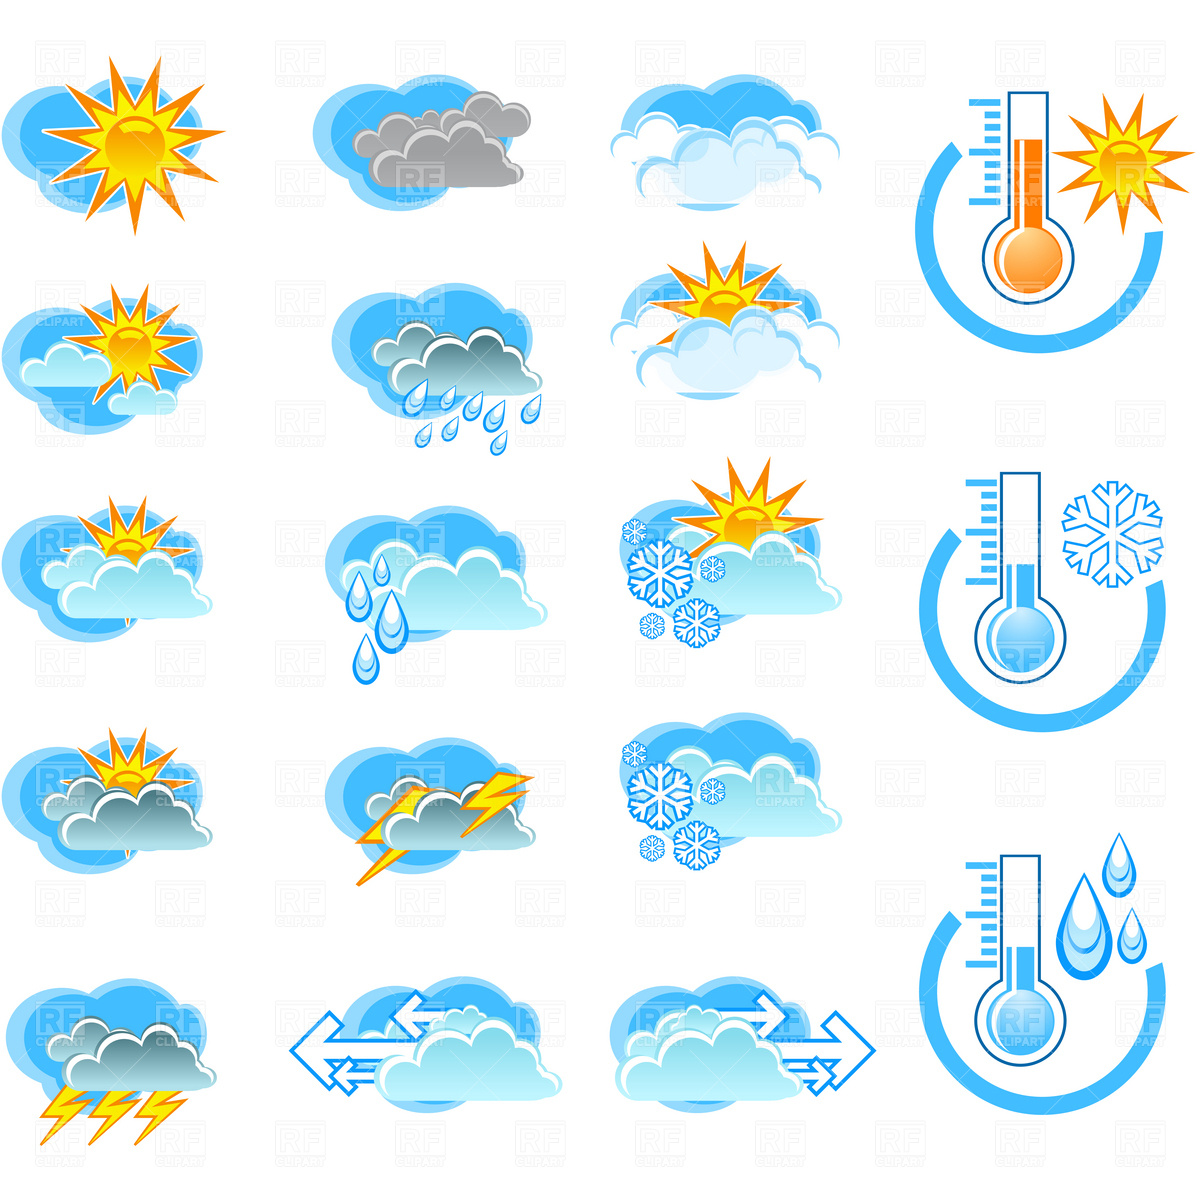 Weather clipart